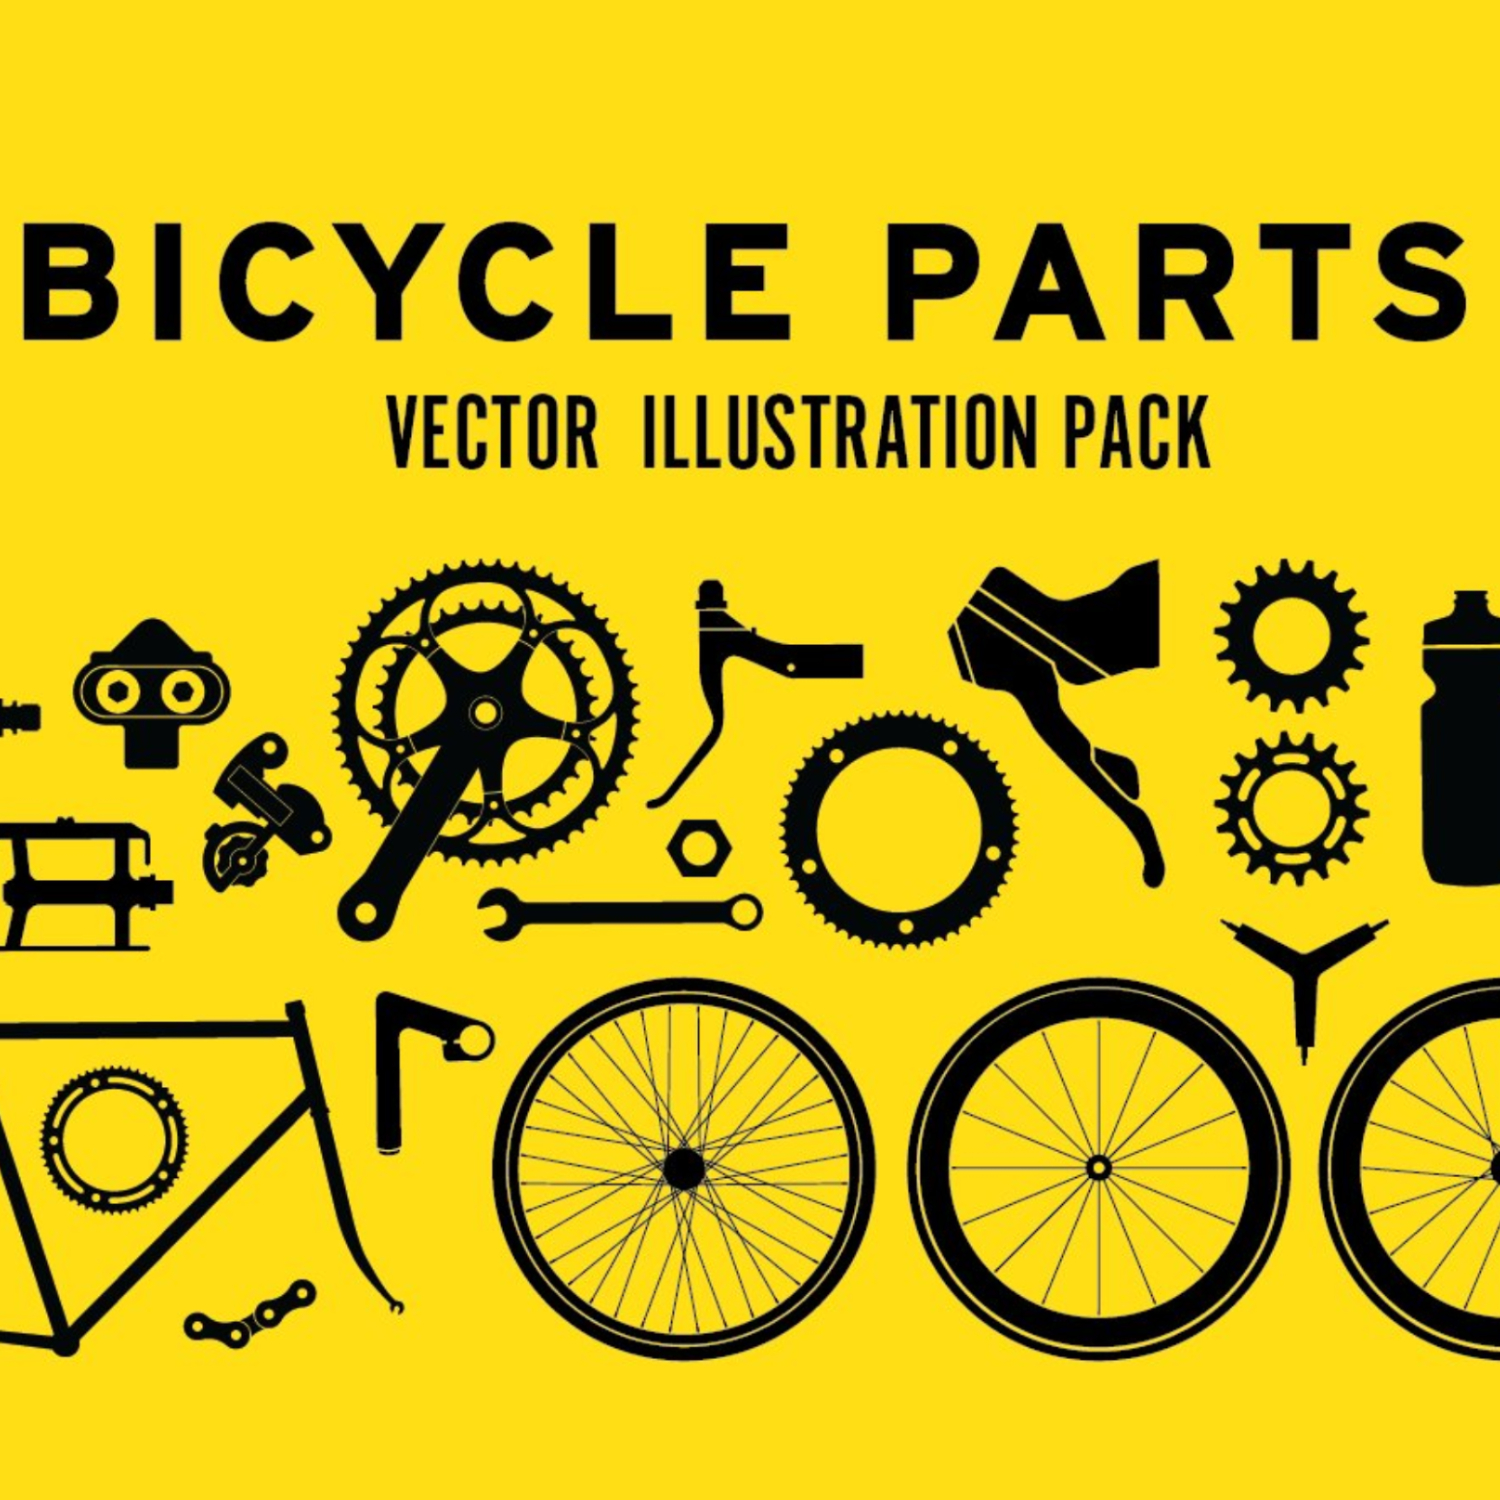 Bicycle Parts.